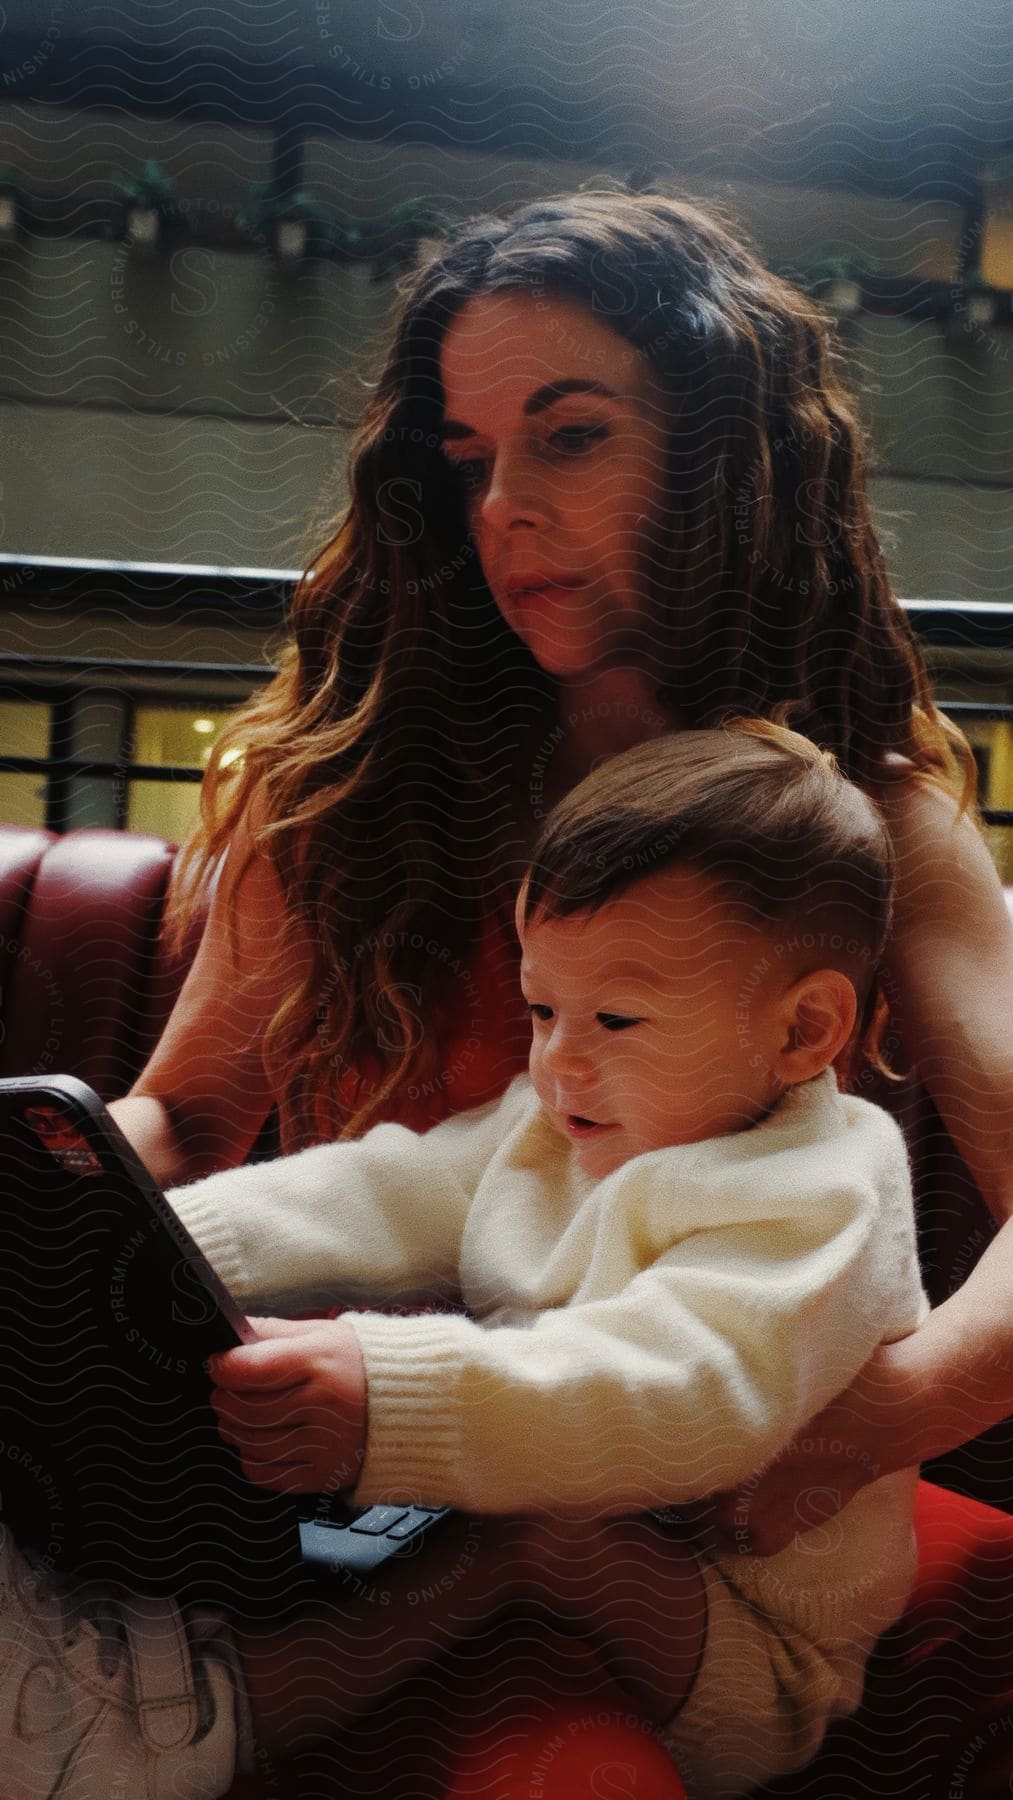 Mother sitting with her baby on her lap on a red upholstered bench with a laptop in use.